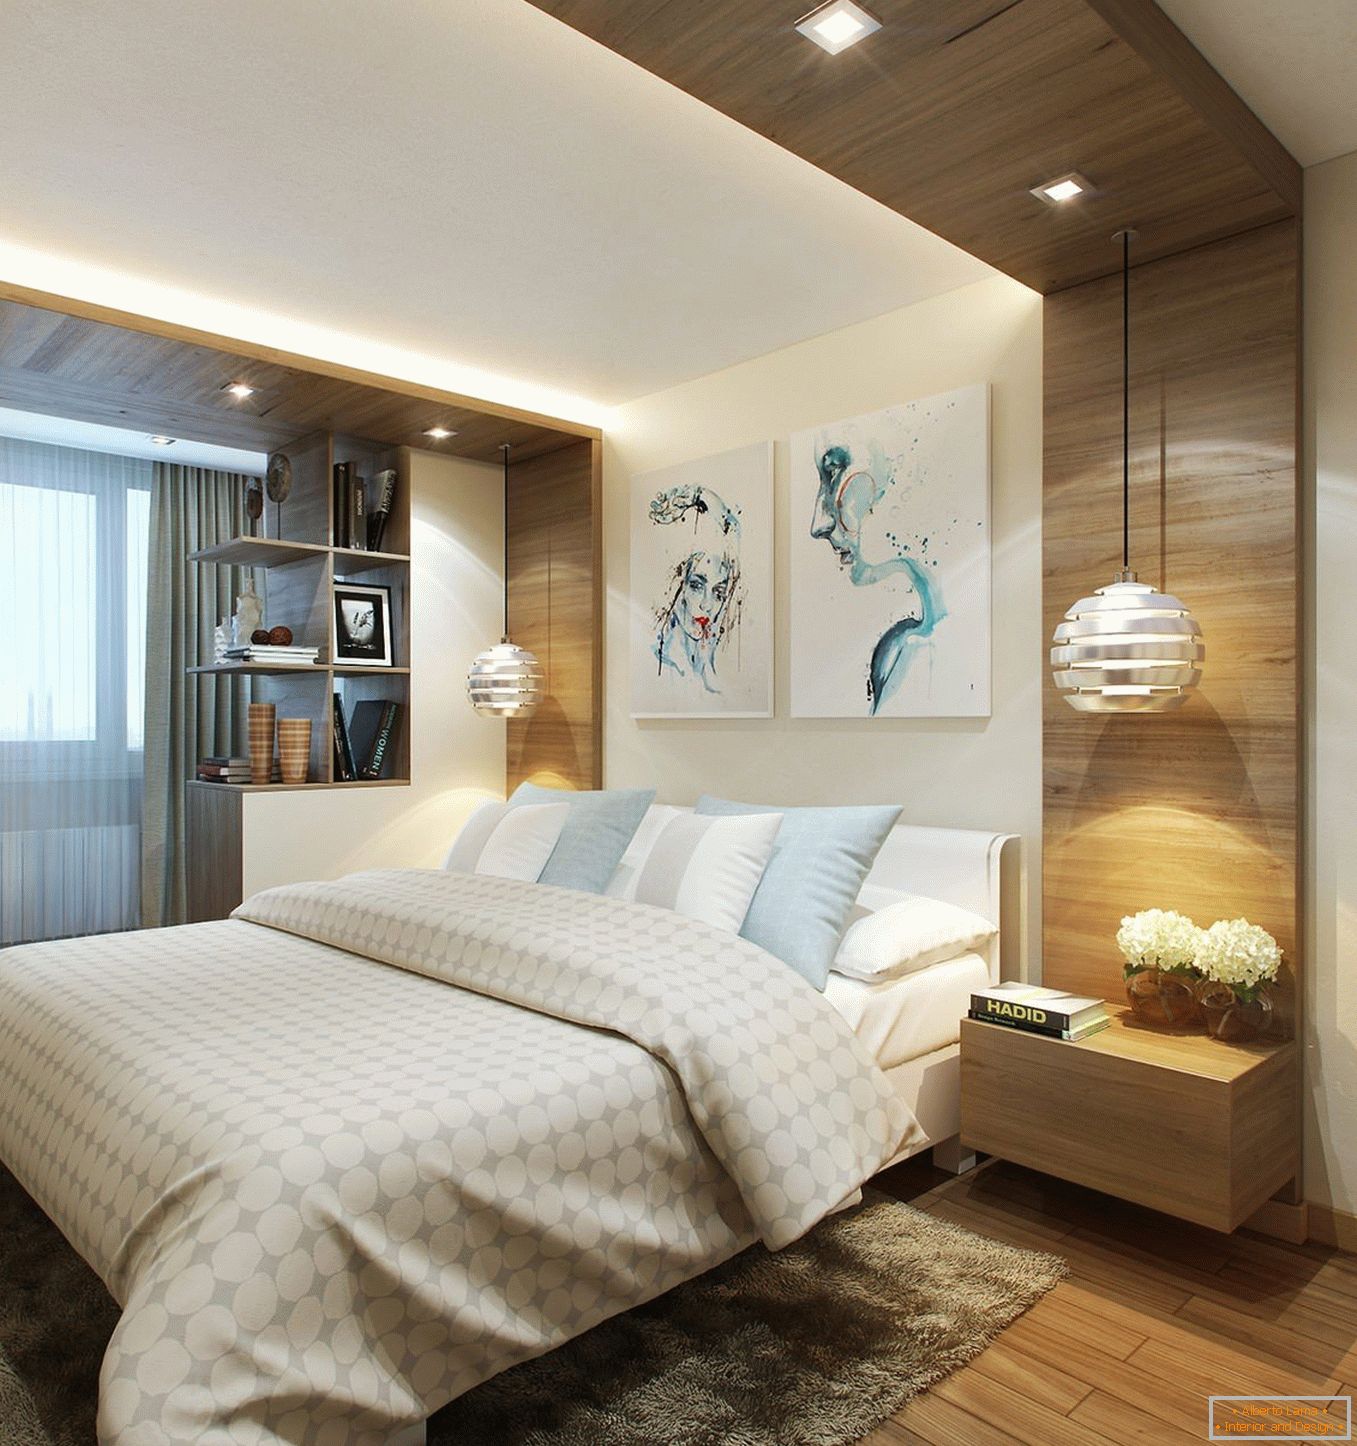 Bedroom combined with balcony